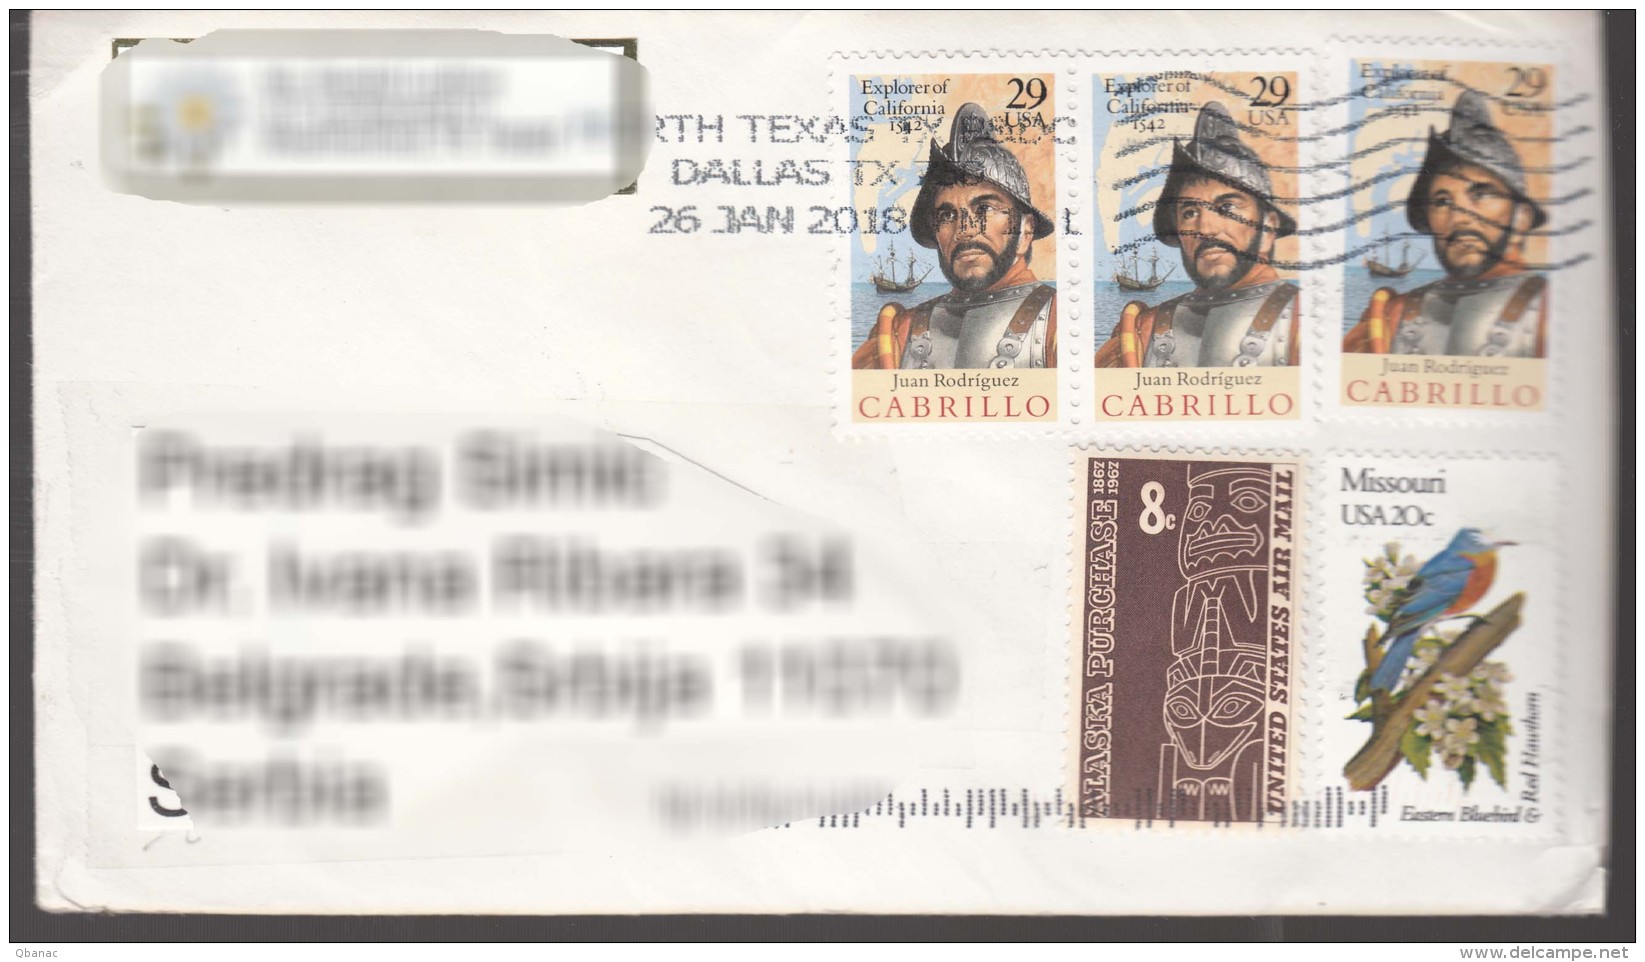 USA Modern Stamps Travelled Cover To Serbia - Covers & Documents